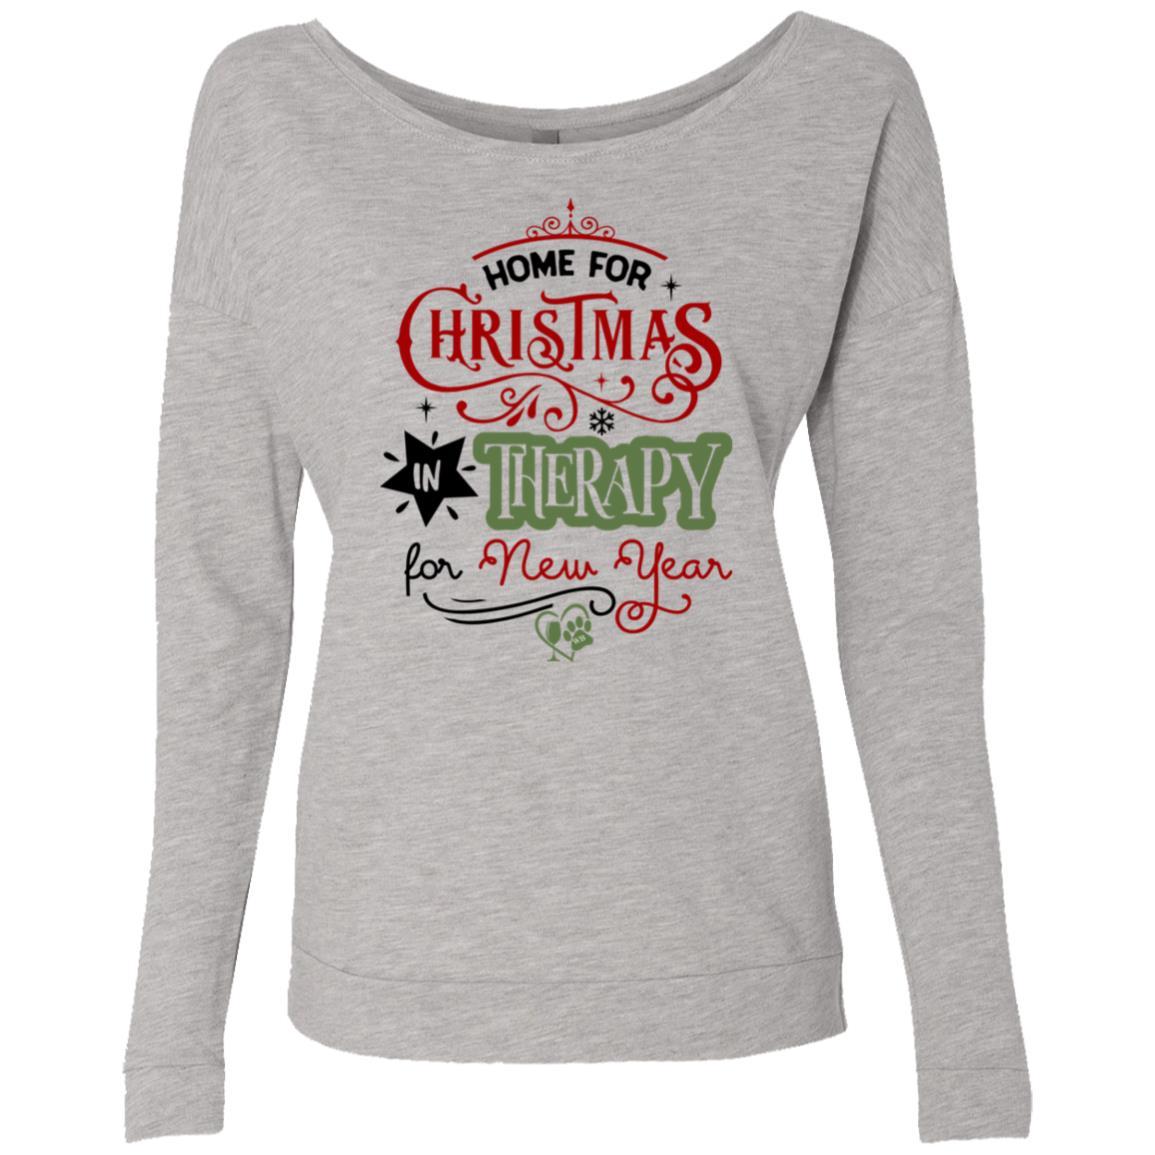 Sweatshirts Heather Grey / S WineyBitches.Co Ladies' "Home For Christmas In Therapy On New Years" French Terry Scoop WineyBitchesCo